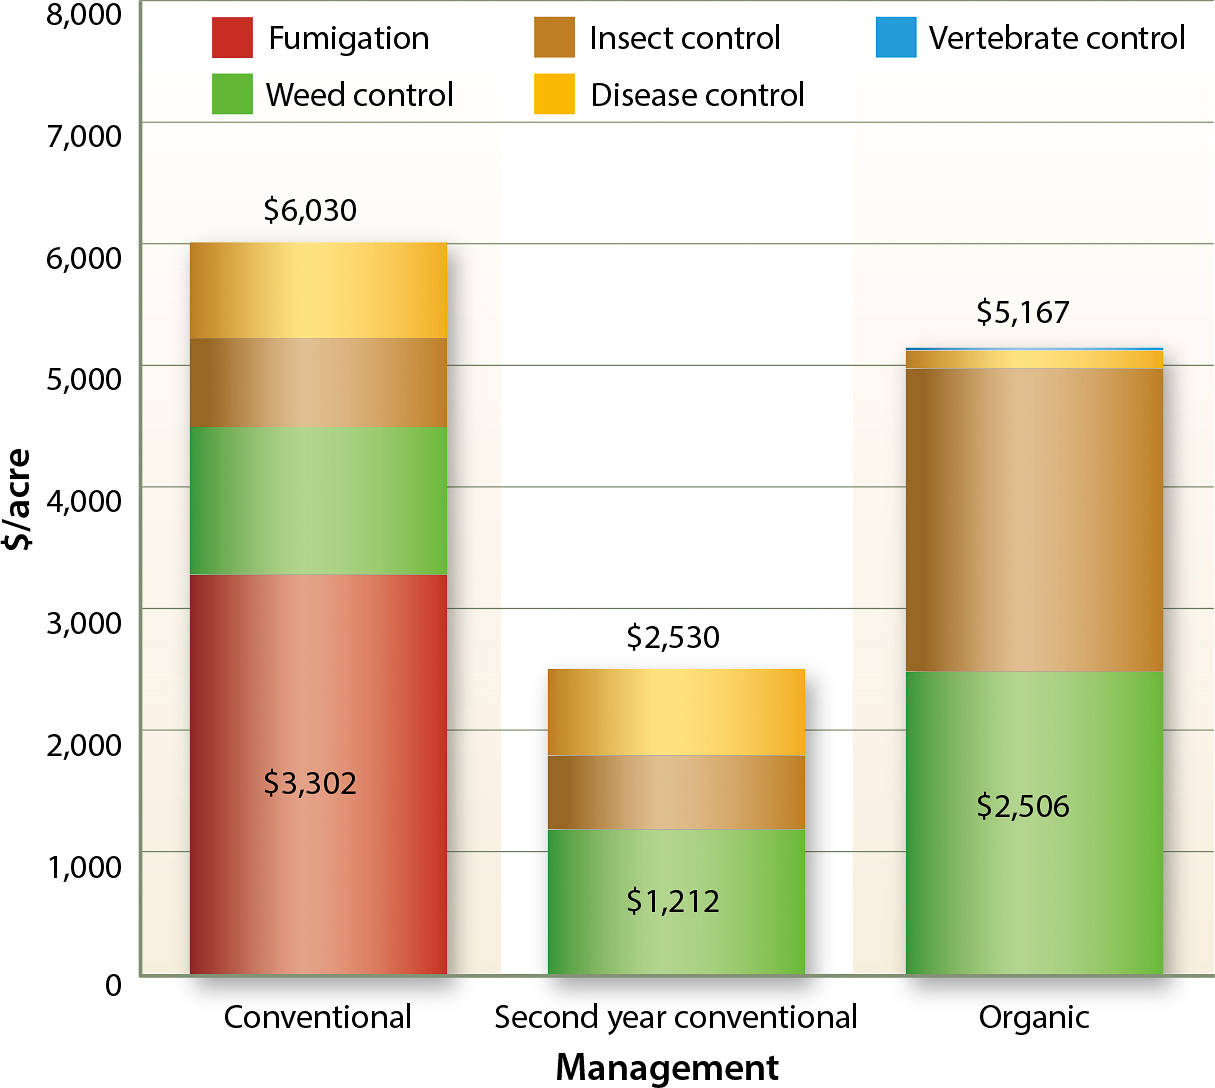 Pest management costs for Santa Cruz–Monterey area conventional (2010), second year conventional (2011) and organic (2014) strawberries.